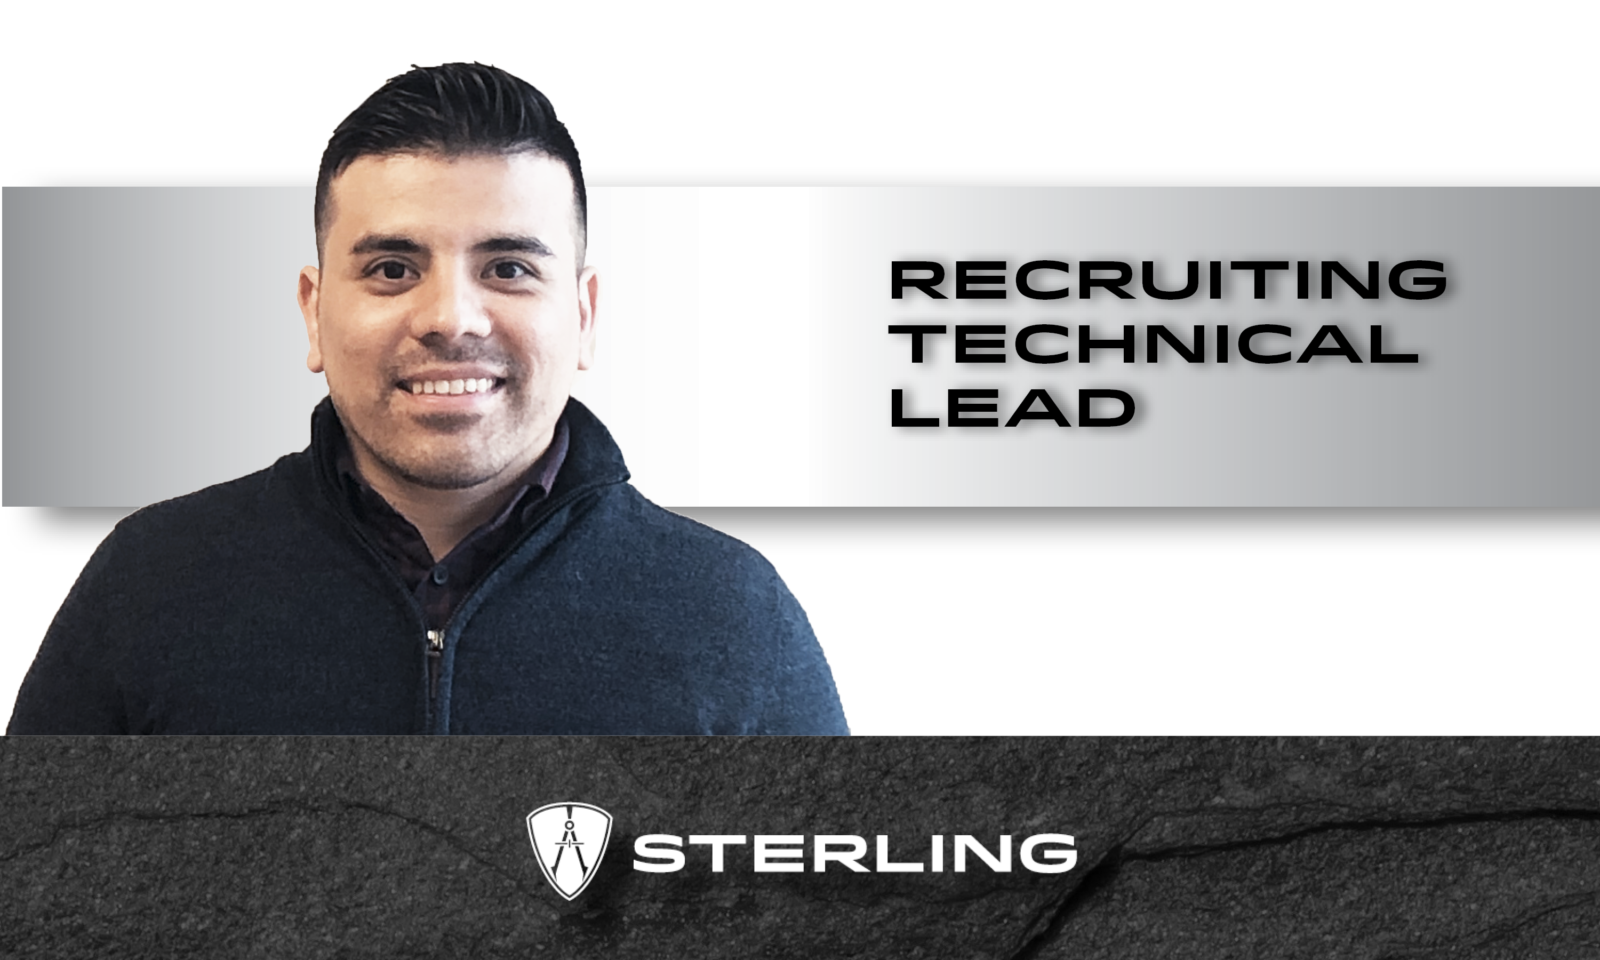 Recruiting Technical Lead at Sterling – Ric Delgado